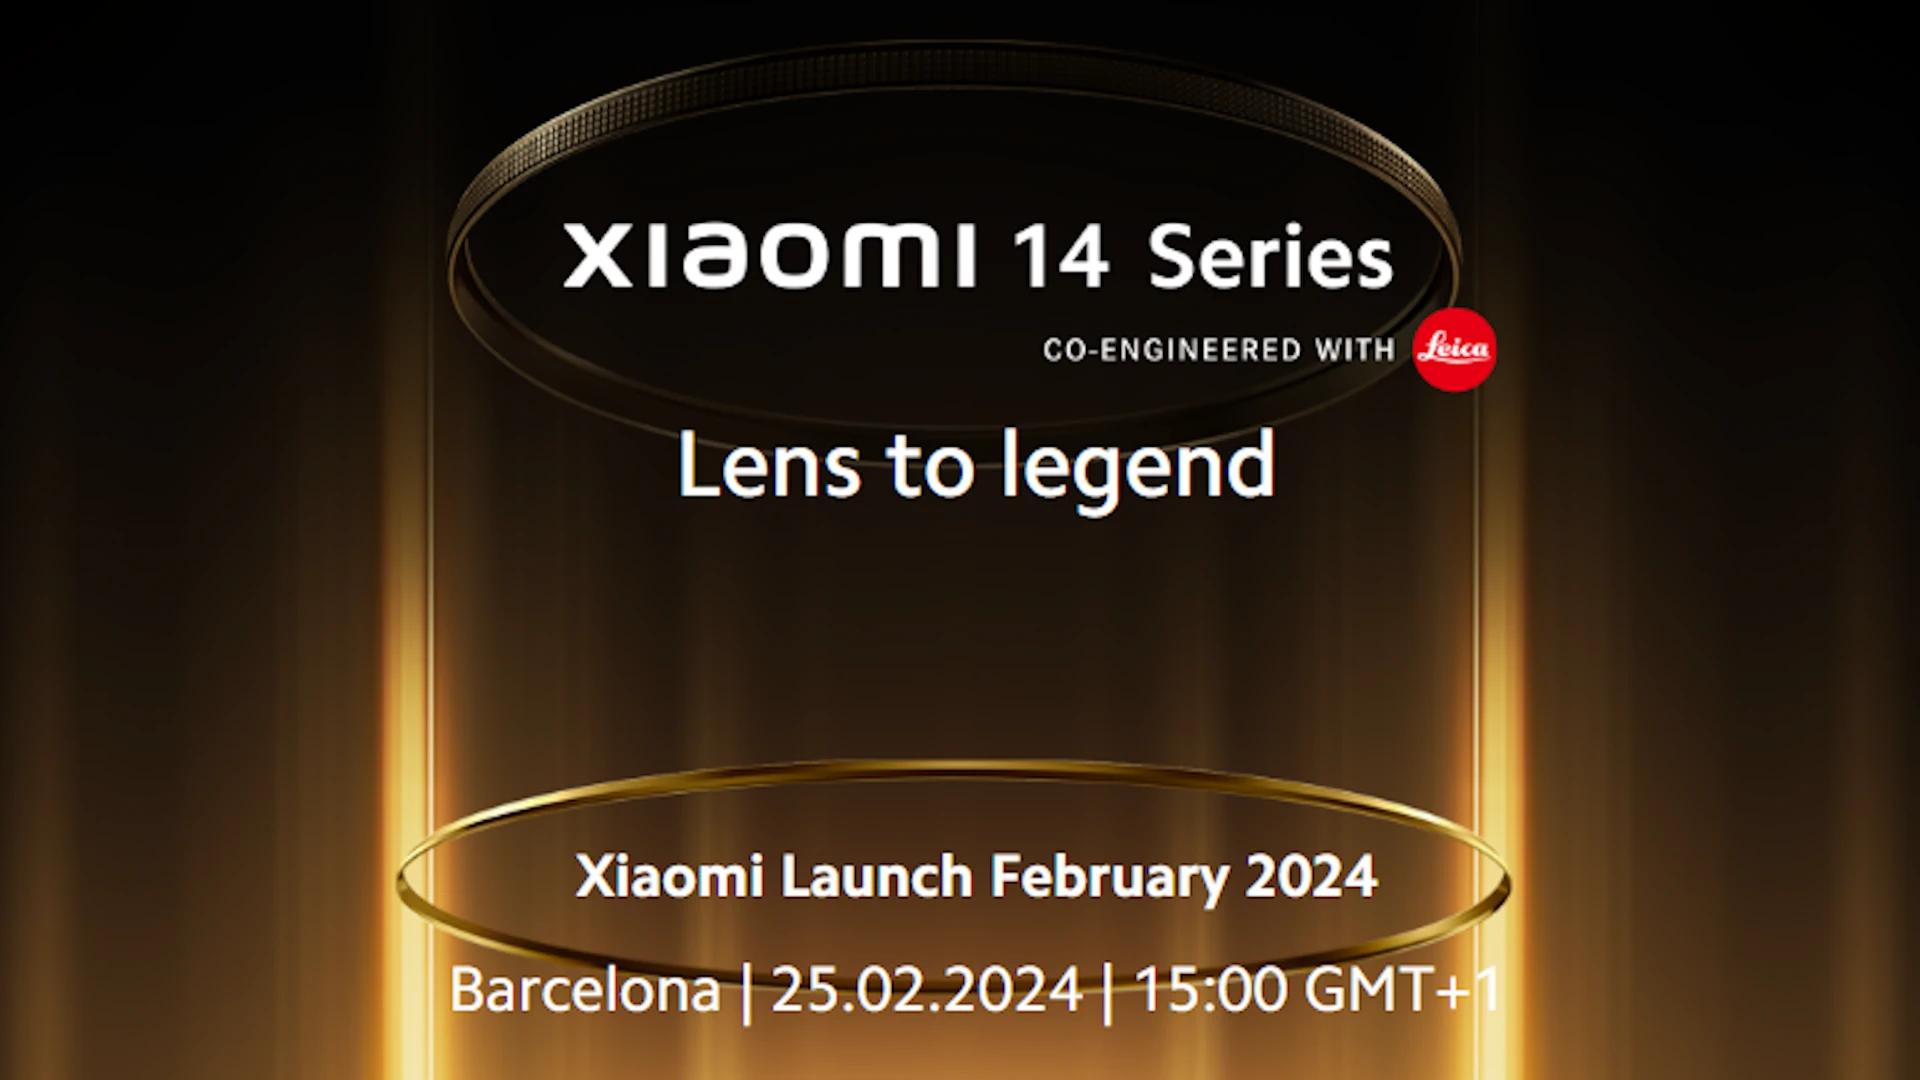 However, the Xiaomi 14 series of phones will arrive on the international market on February 25